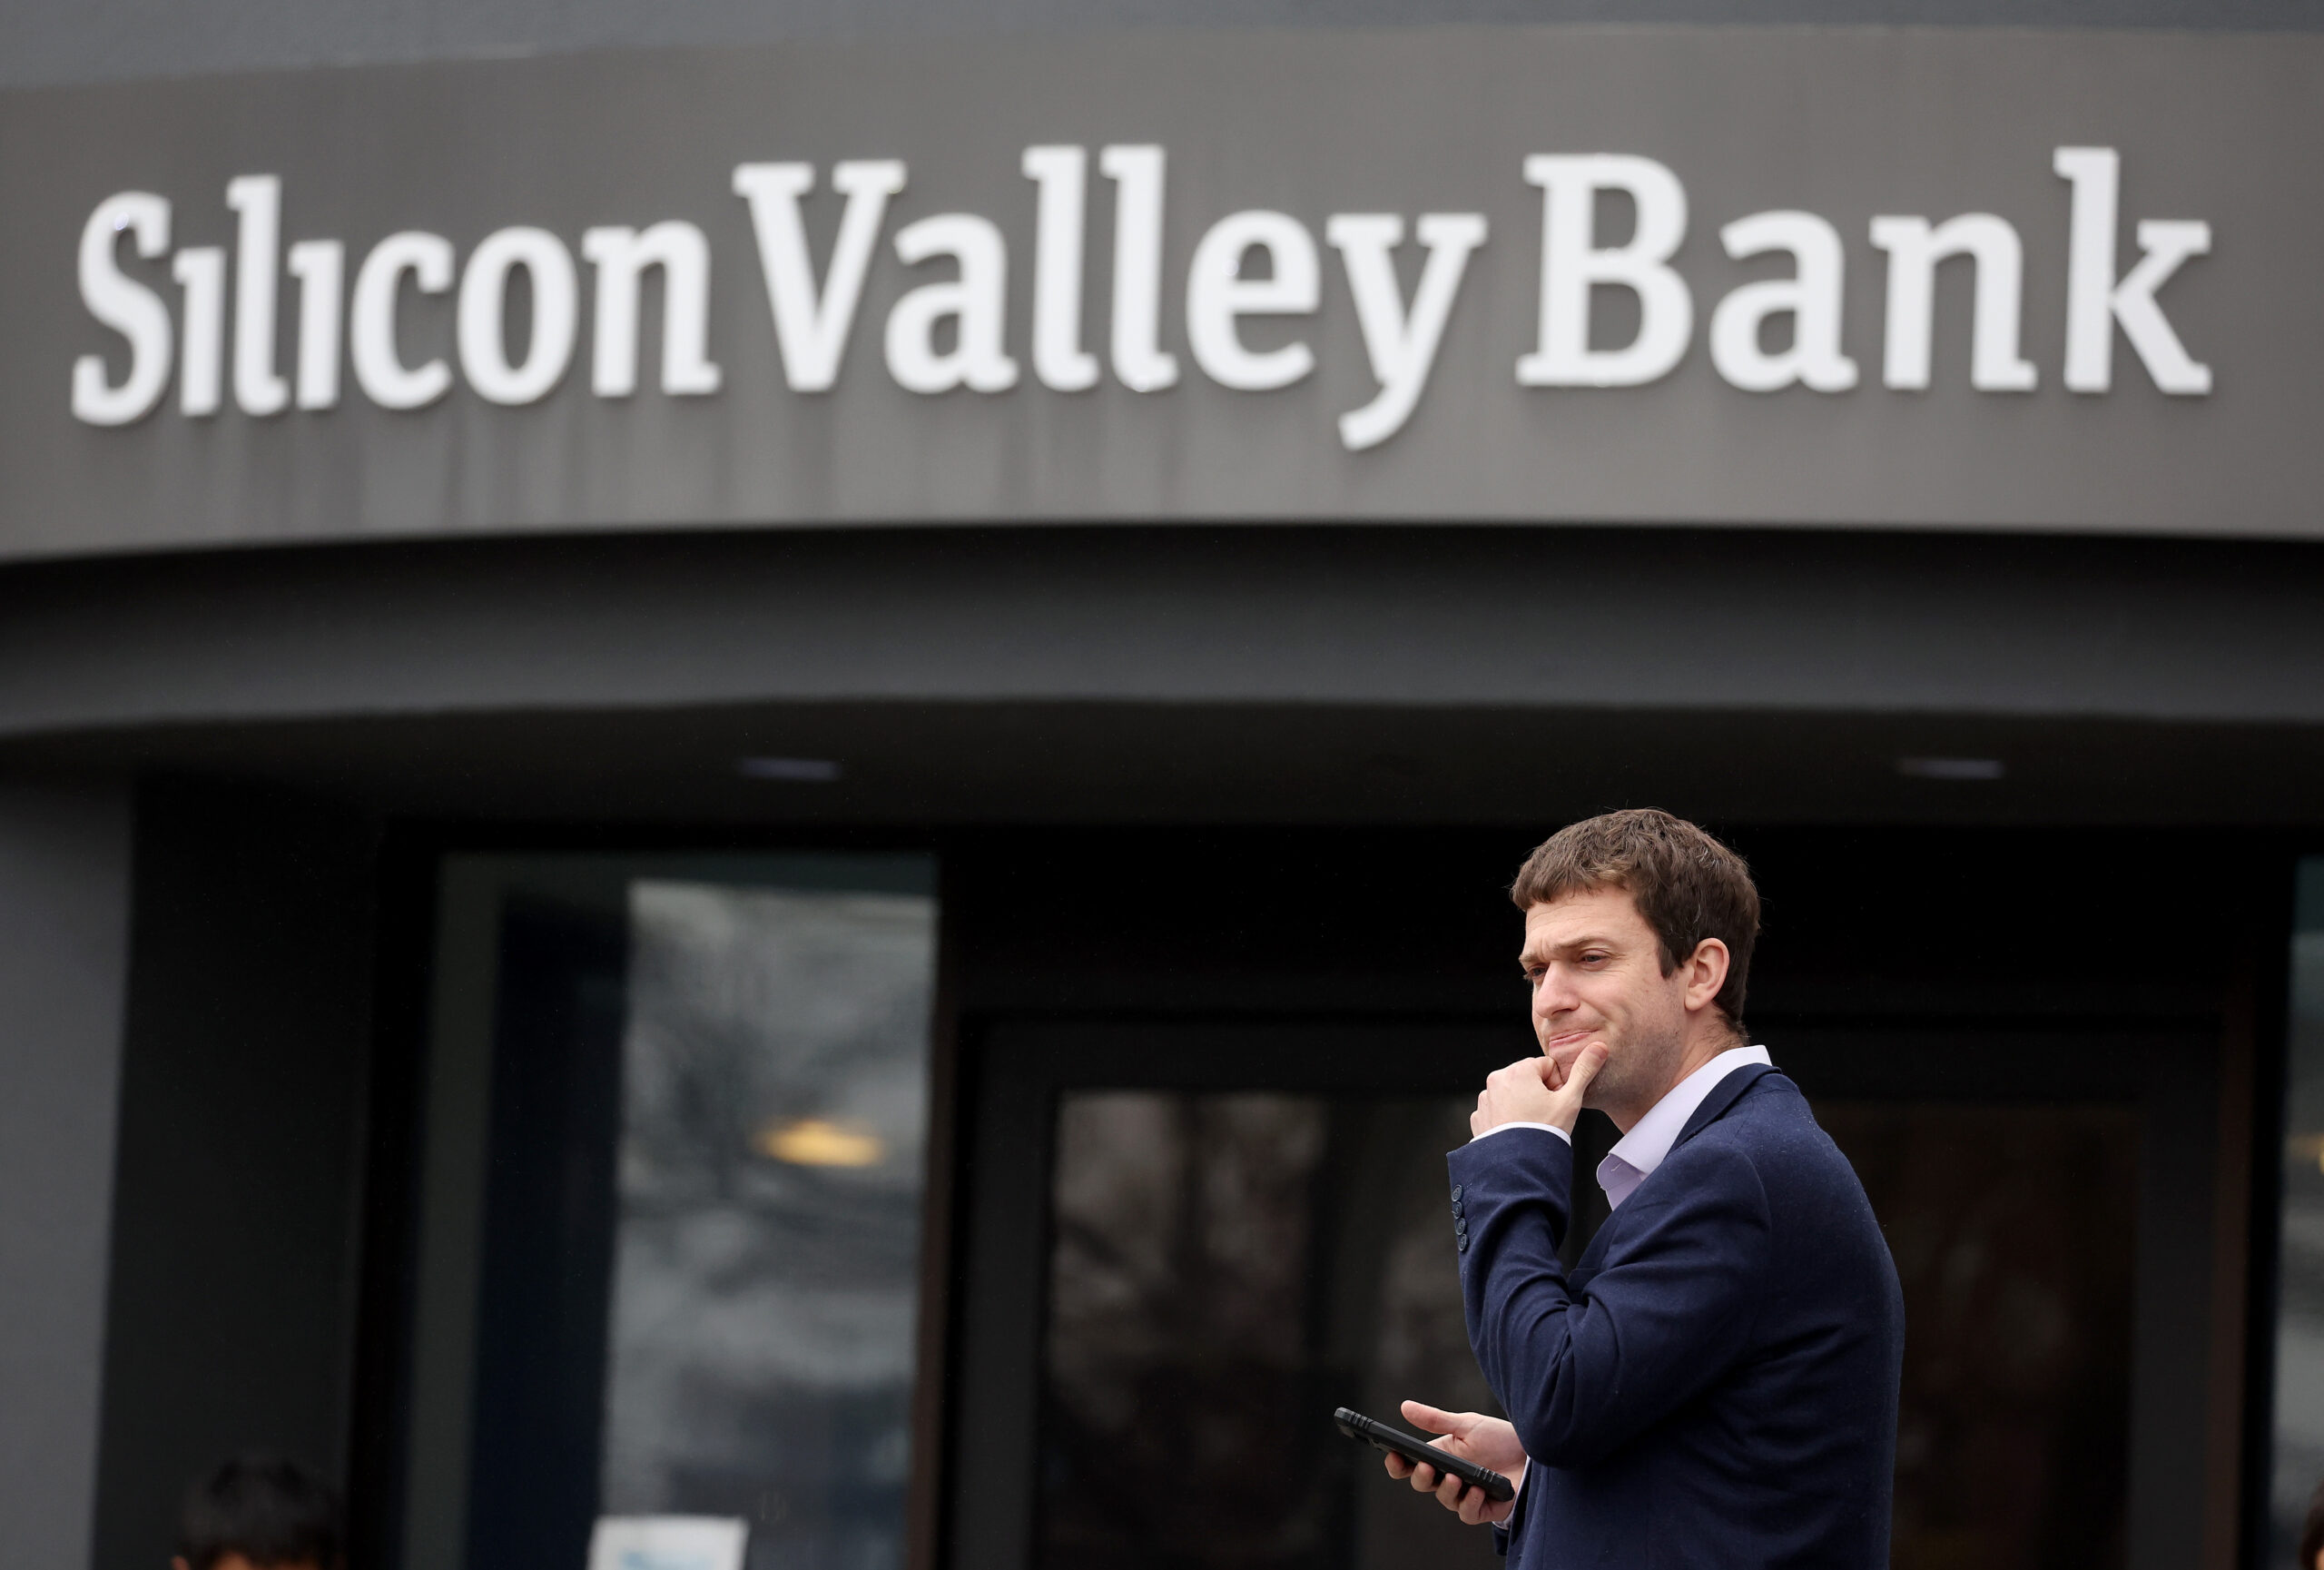 ‘Payroll Is on Monday’: VCs, Startups Scramble for Answers After Biggest Bank Crash Since 2008